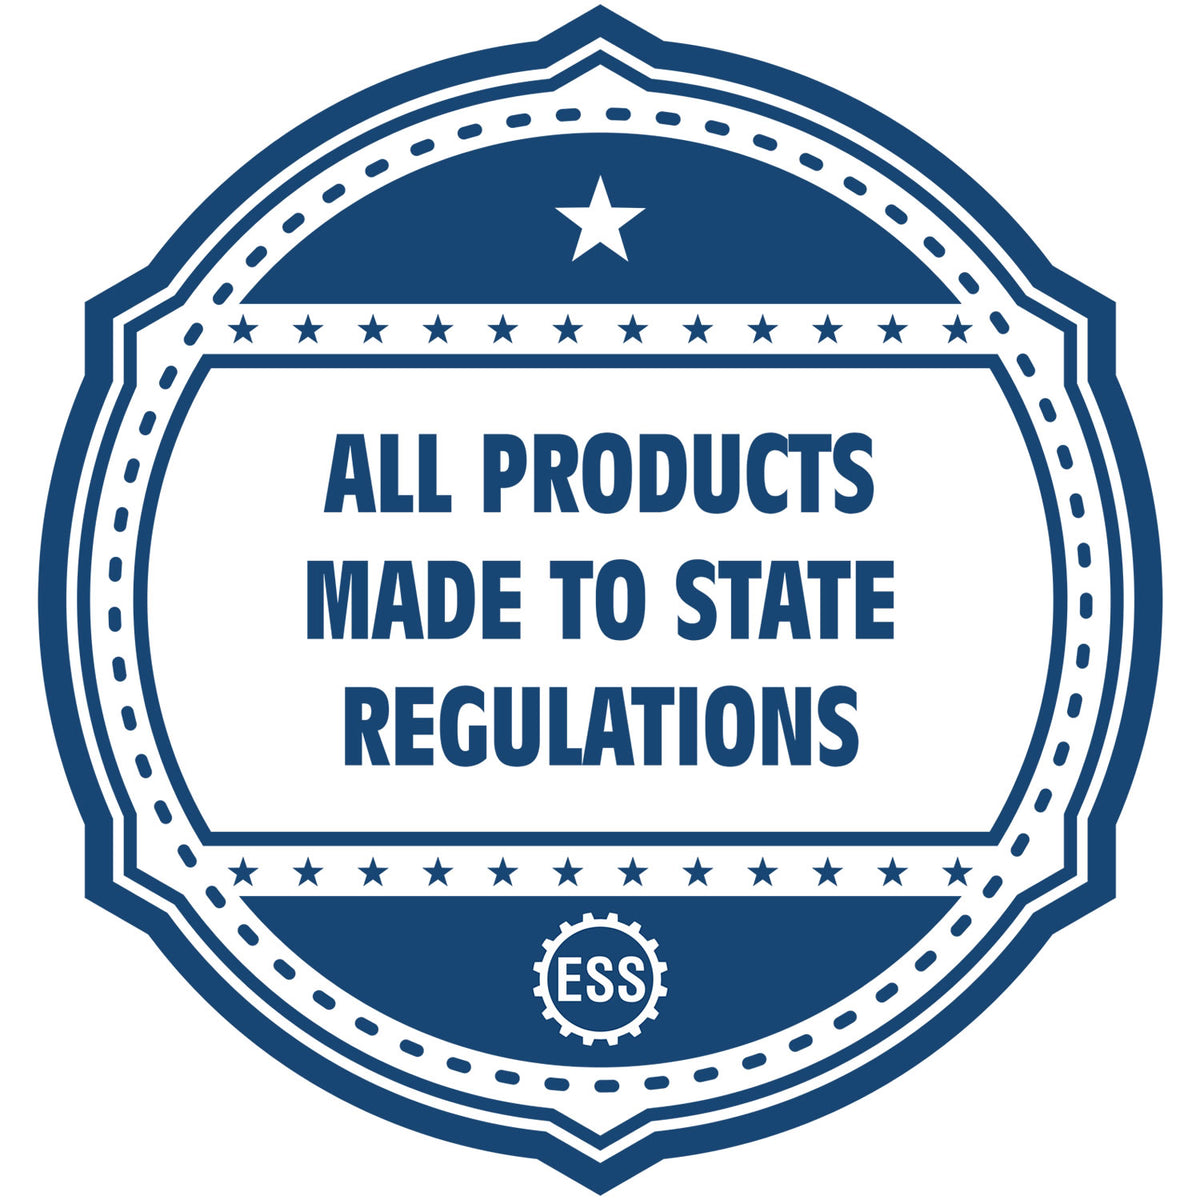 An icon or badge element for the Handheld Indiana Architect Seal Embosser showing that this product is made in compliance with state regulations.